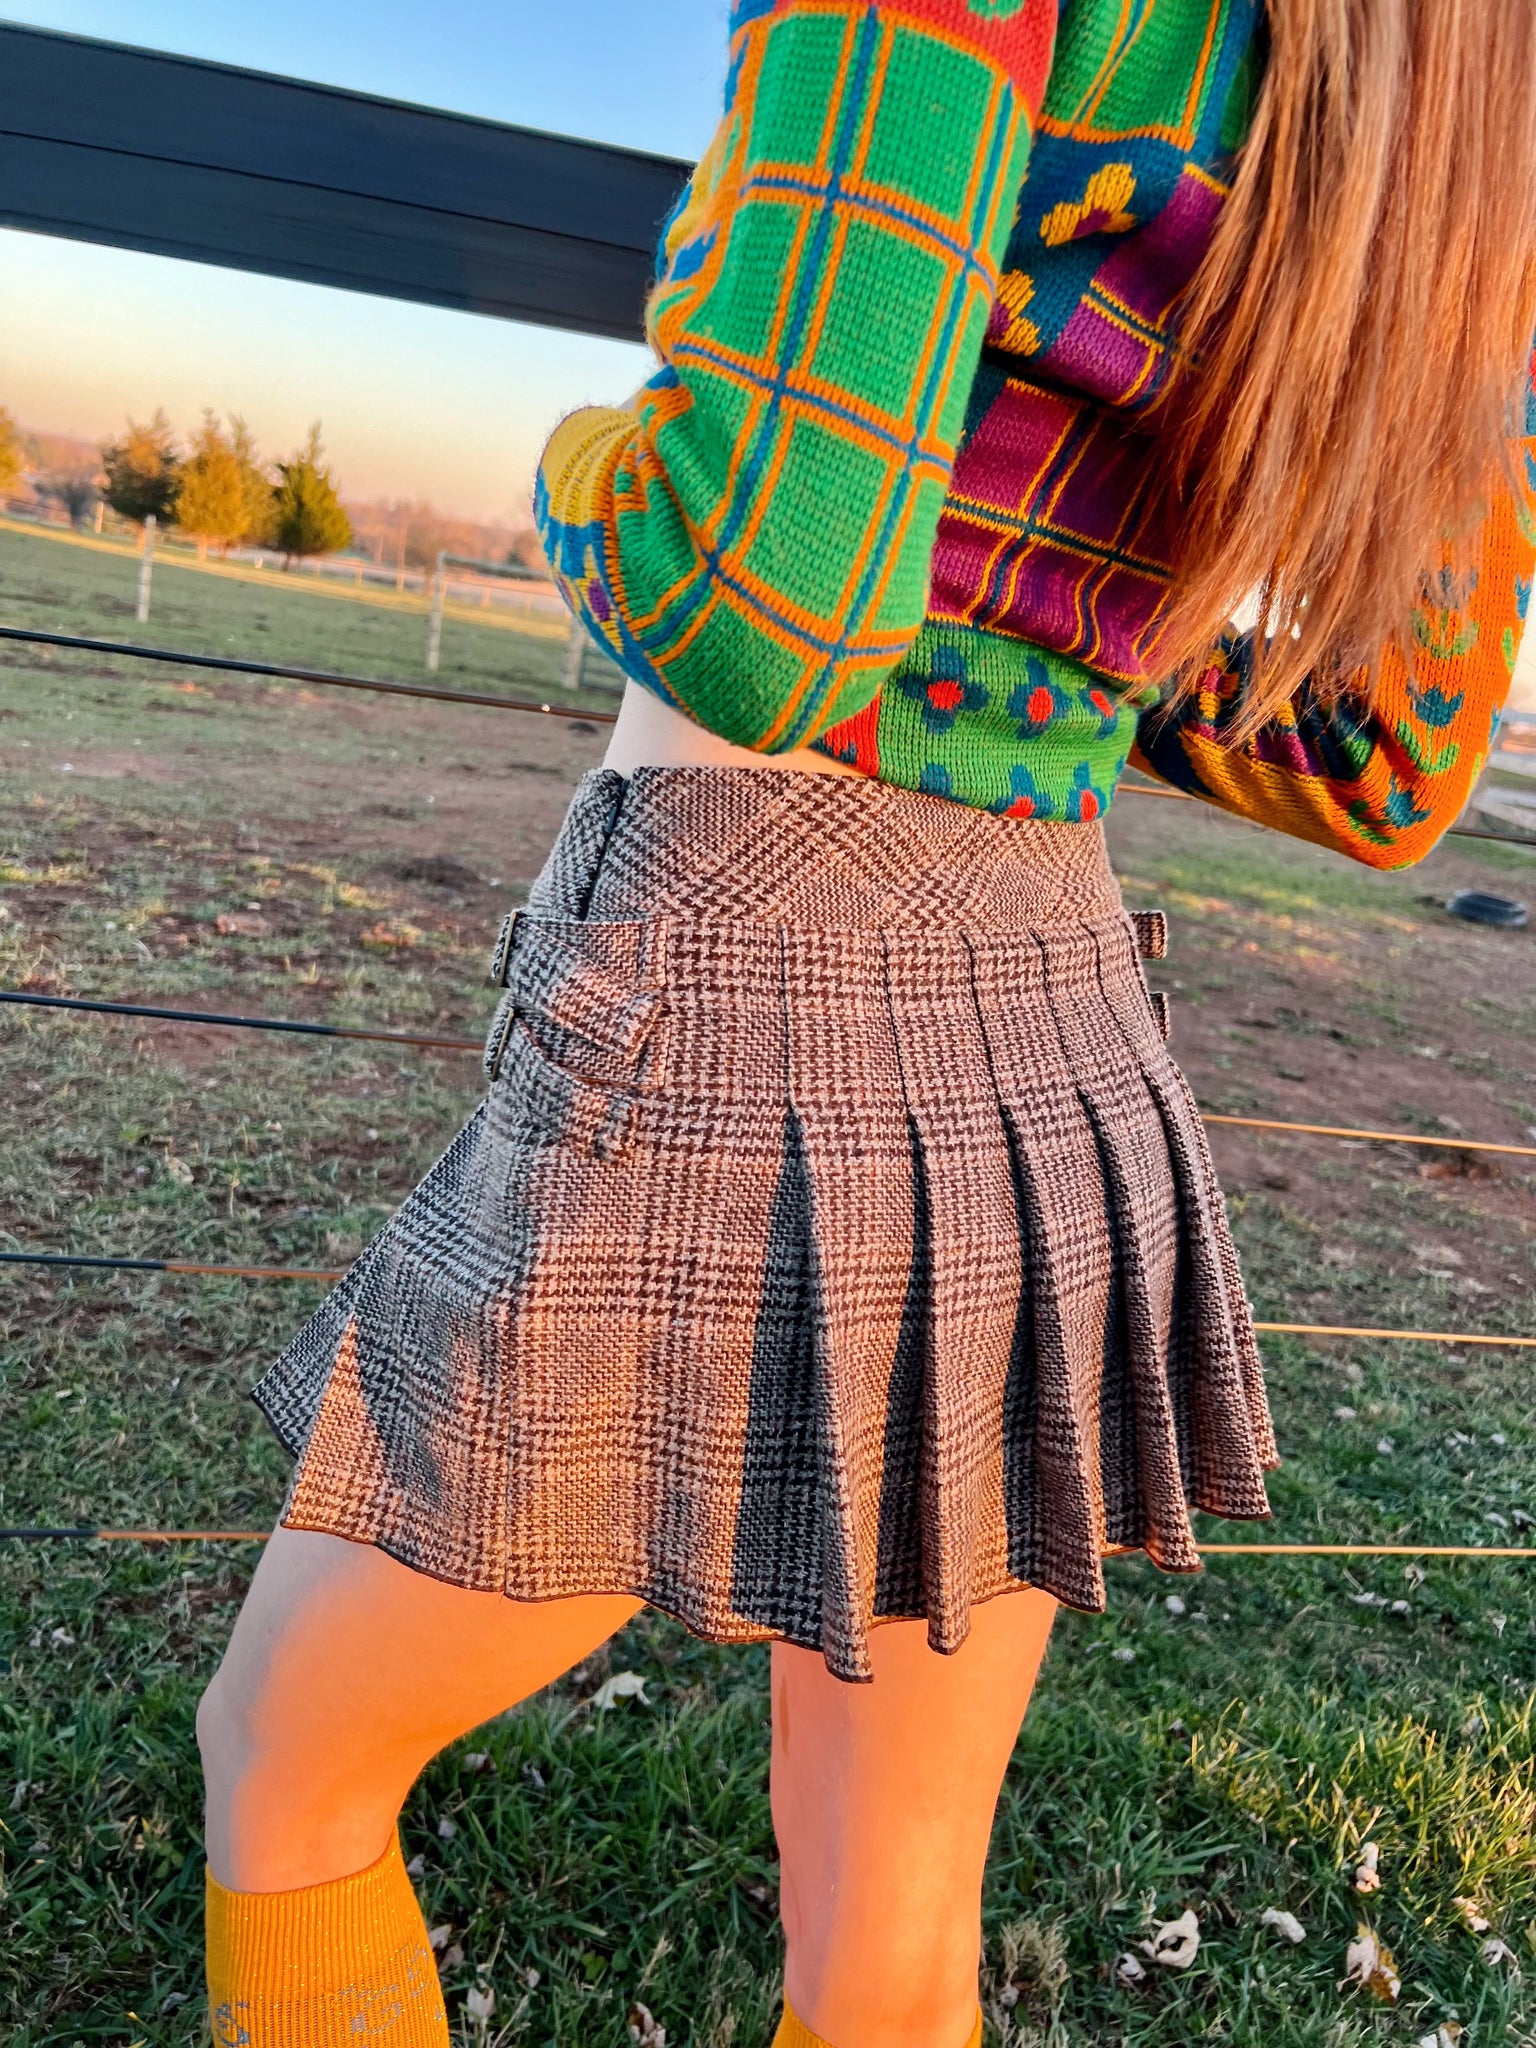 2000s Juicy Couture Brown Plaid Pleated Mini Skirt with Buckle Details